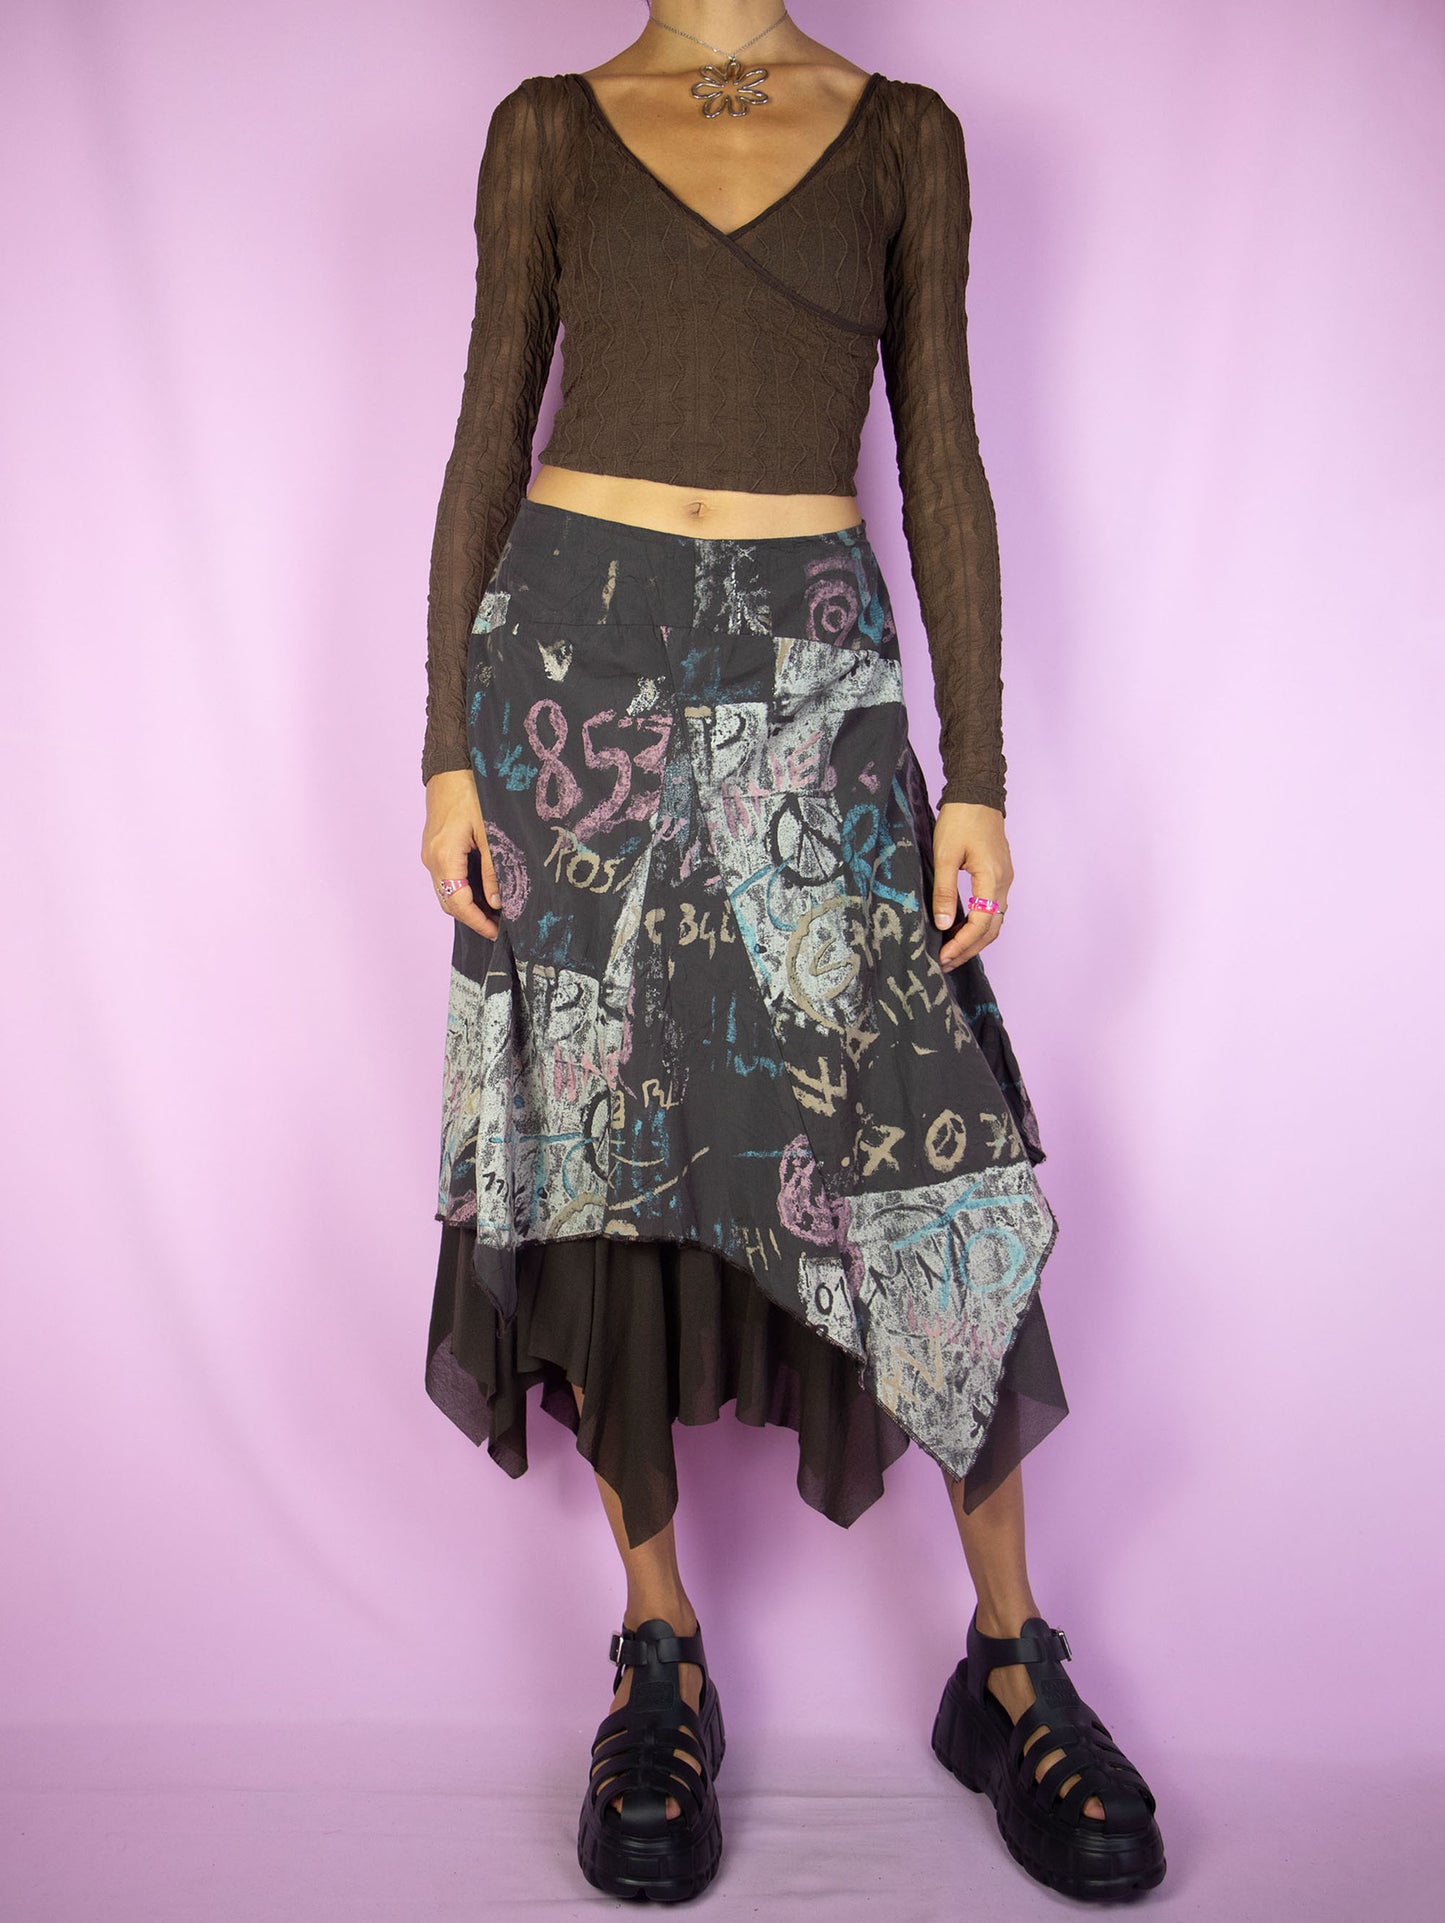 The Y2K Cyber Asymmetric Midi Skirt is a vintage dark brown abstract pointed asymmetrical layered skirt with semi-sheer mesh hem and side zipper closure. Whimsygoth fairy grunge 2000s subversive party midi skirt.